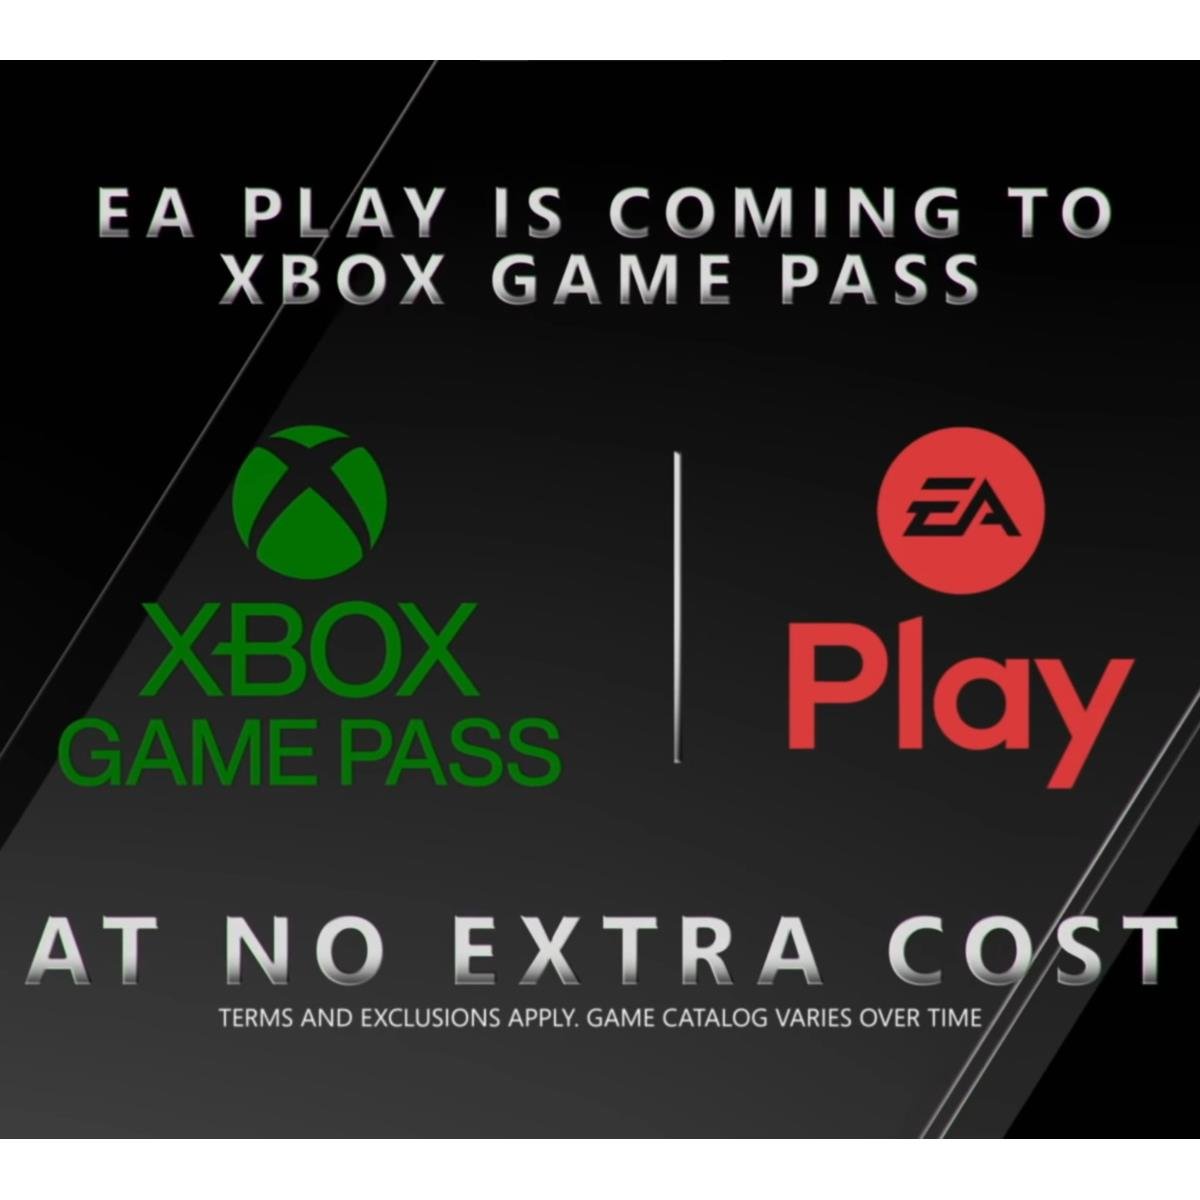 EA Play is coming to Xbox Game Pass on November 10